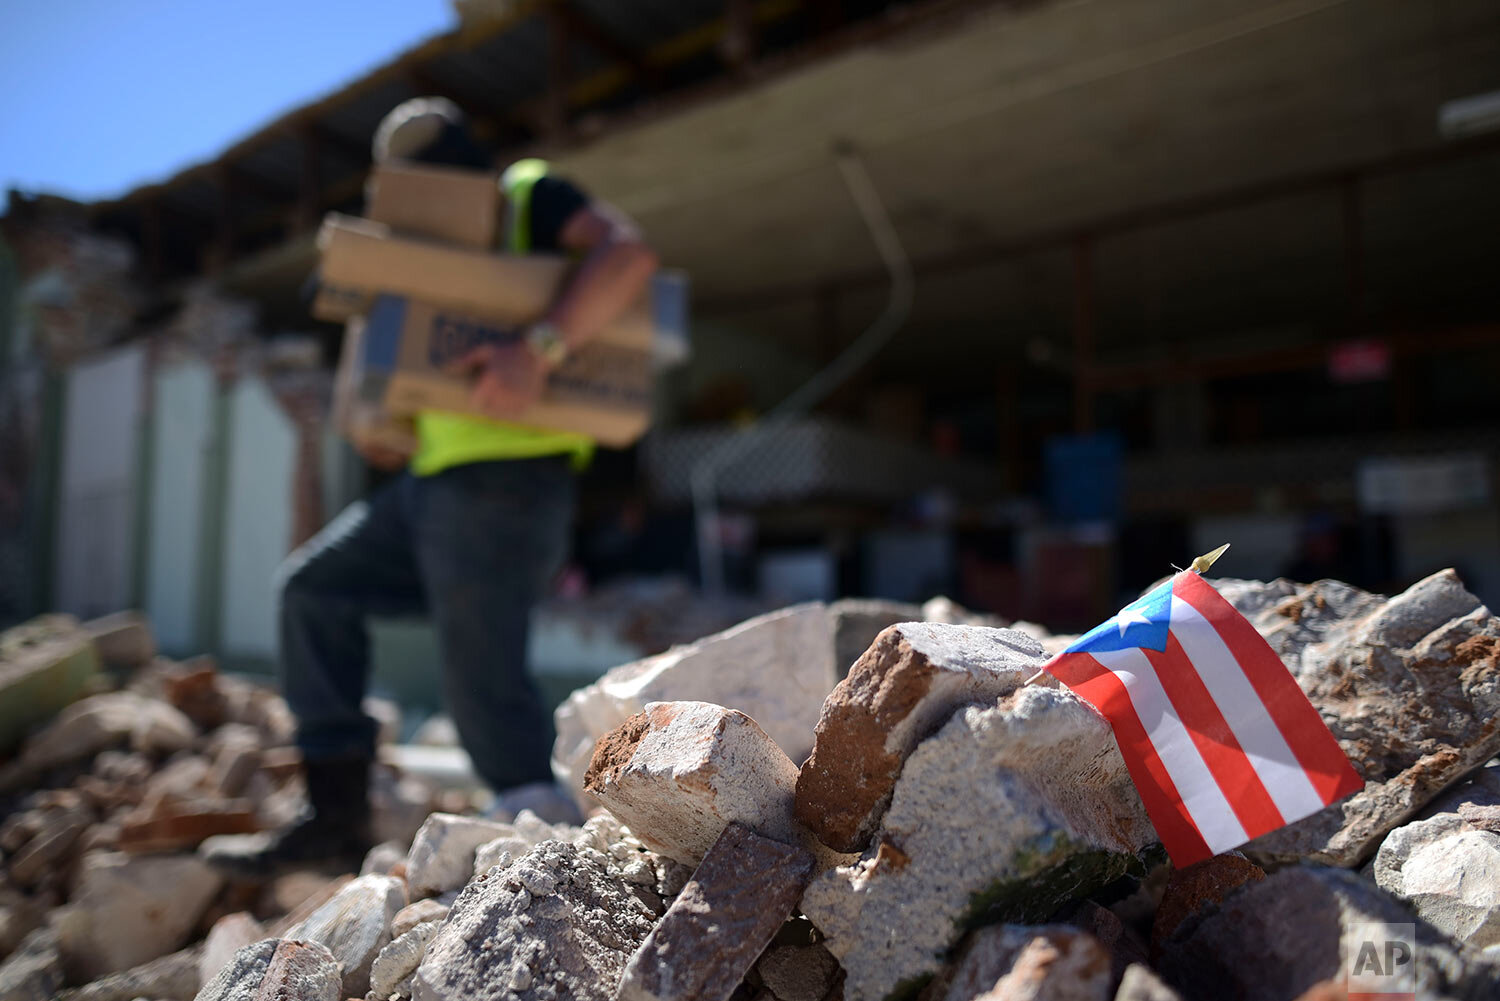  A Puerto Rican flag hangs within the rubble, after it was placed there where store owners and family help remove supplies from Ely Mer Mar hardware store, which partially collapsed after an earthquake struck Guanica, Puerto Rico, Tuesday, Jan. 7, 20